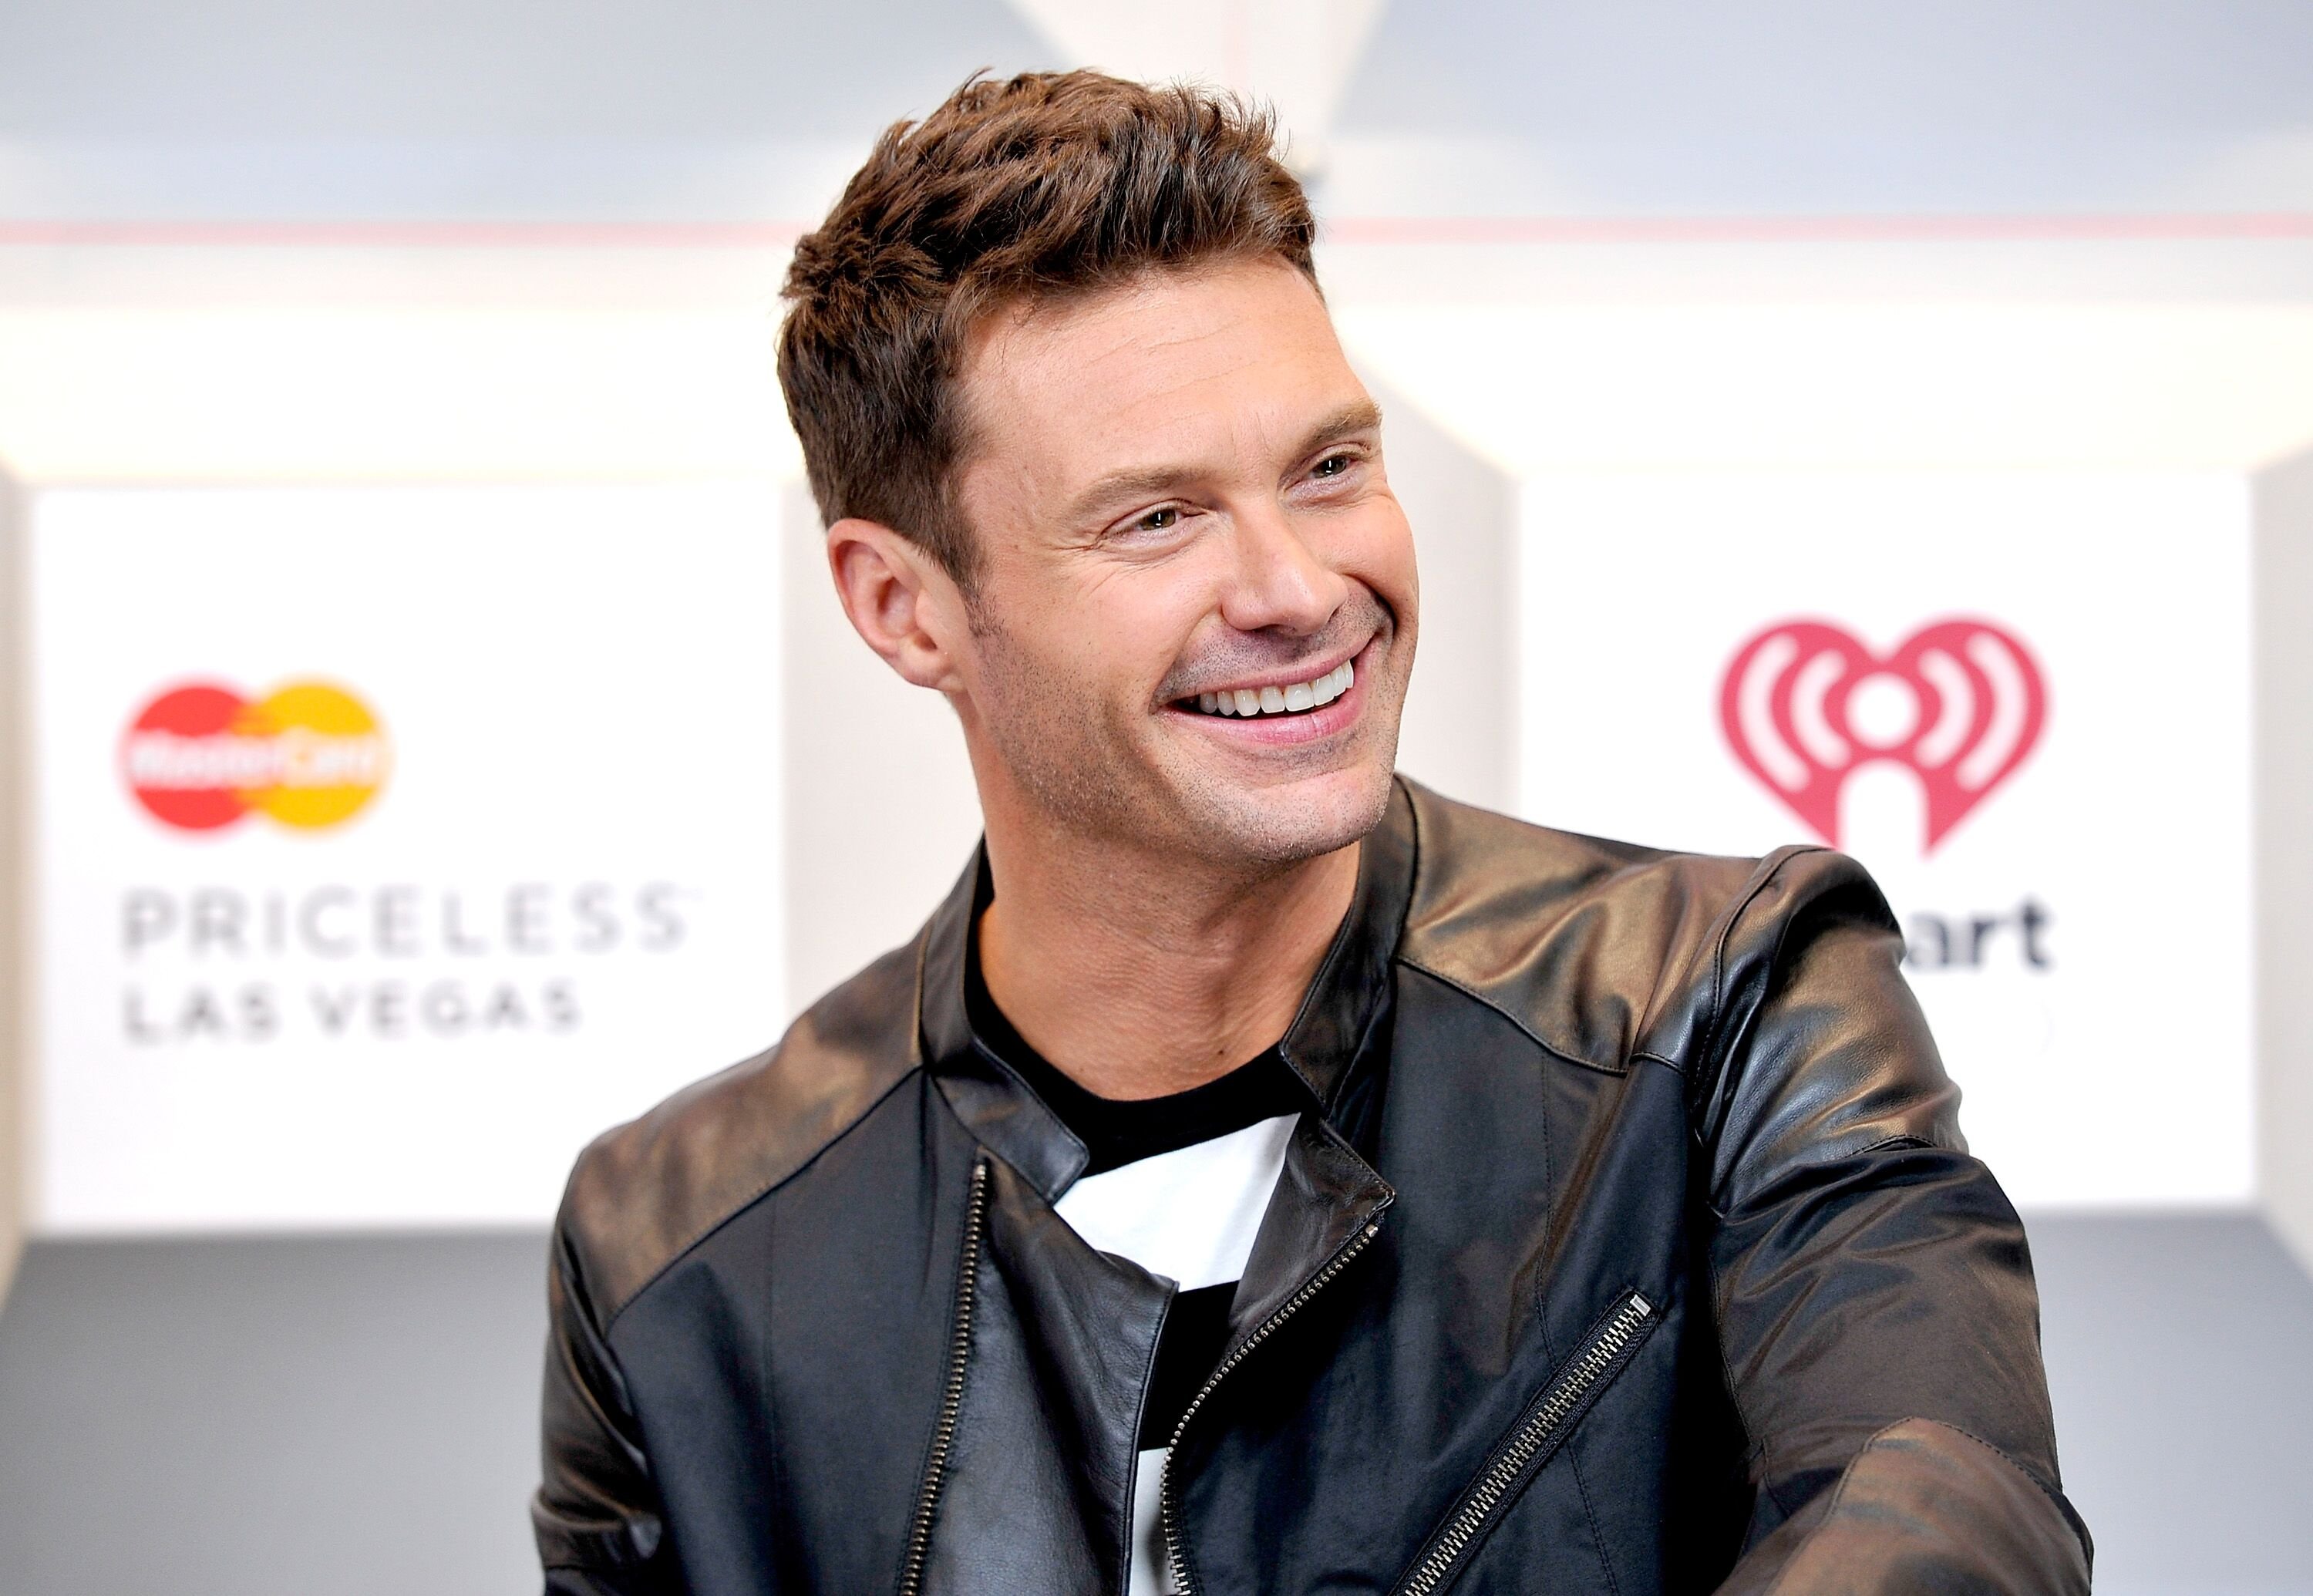 Ryan Seacrest attends the 2014 iHeartRadio Music Festival at the MGM Grand Garden Arena on September 19, 2014 in Las Vegas, Nevada. | Photo: Getty Images